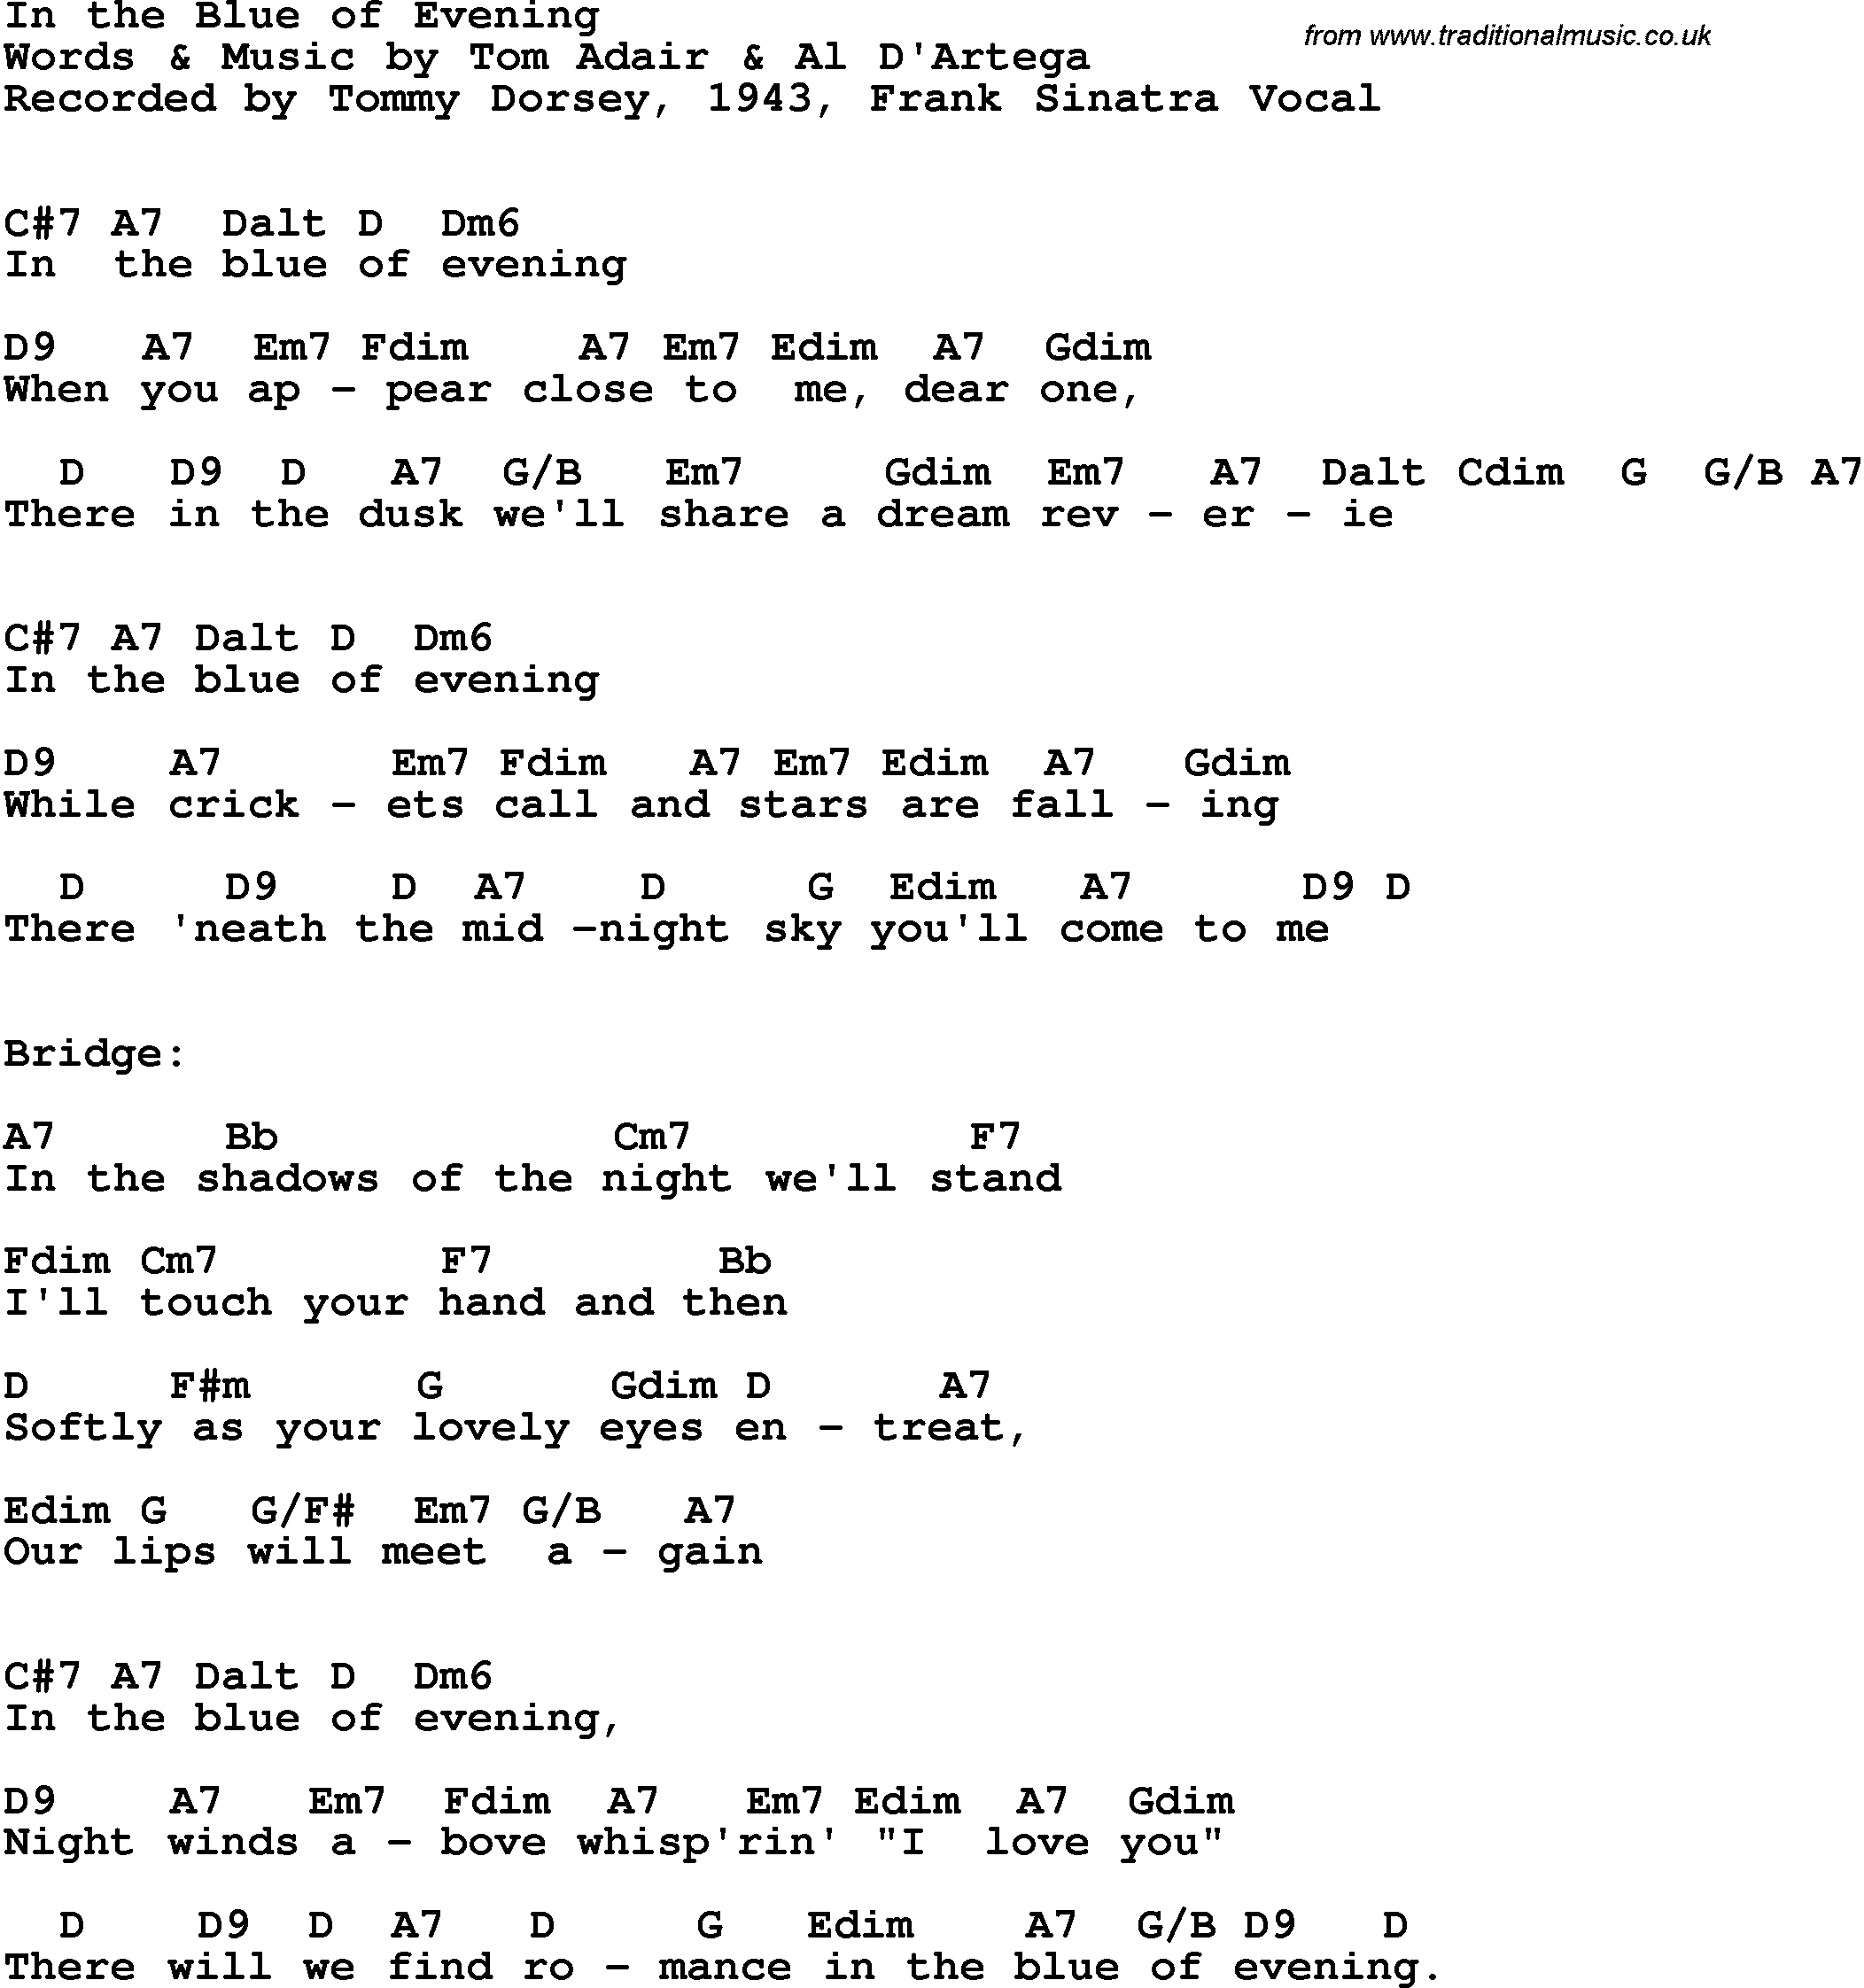 Song Lyrics with guitar chords for In The Blue Of Evening - Tommy Dorsey Orchestra, Frank Sinatra Vocal, 1943